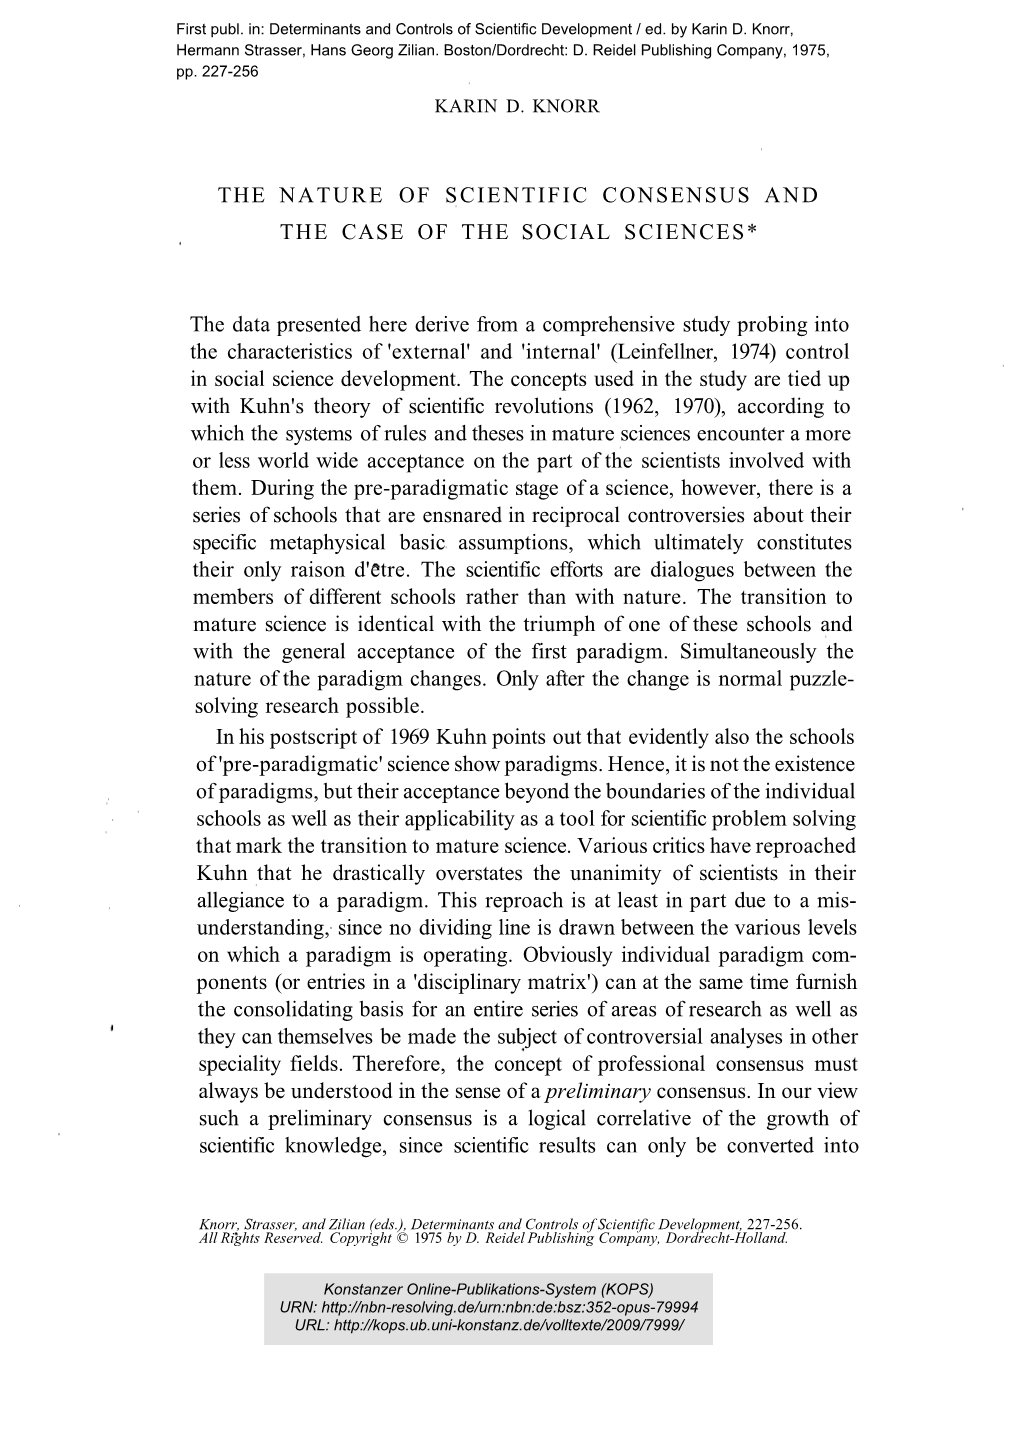 The Nature of Scientific Consensus and the Case of the Social Sciences*